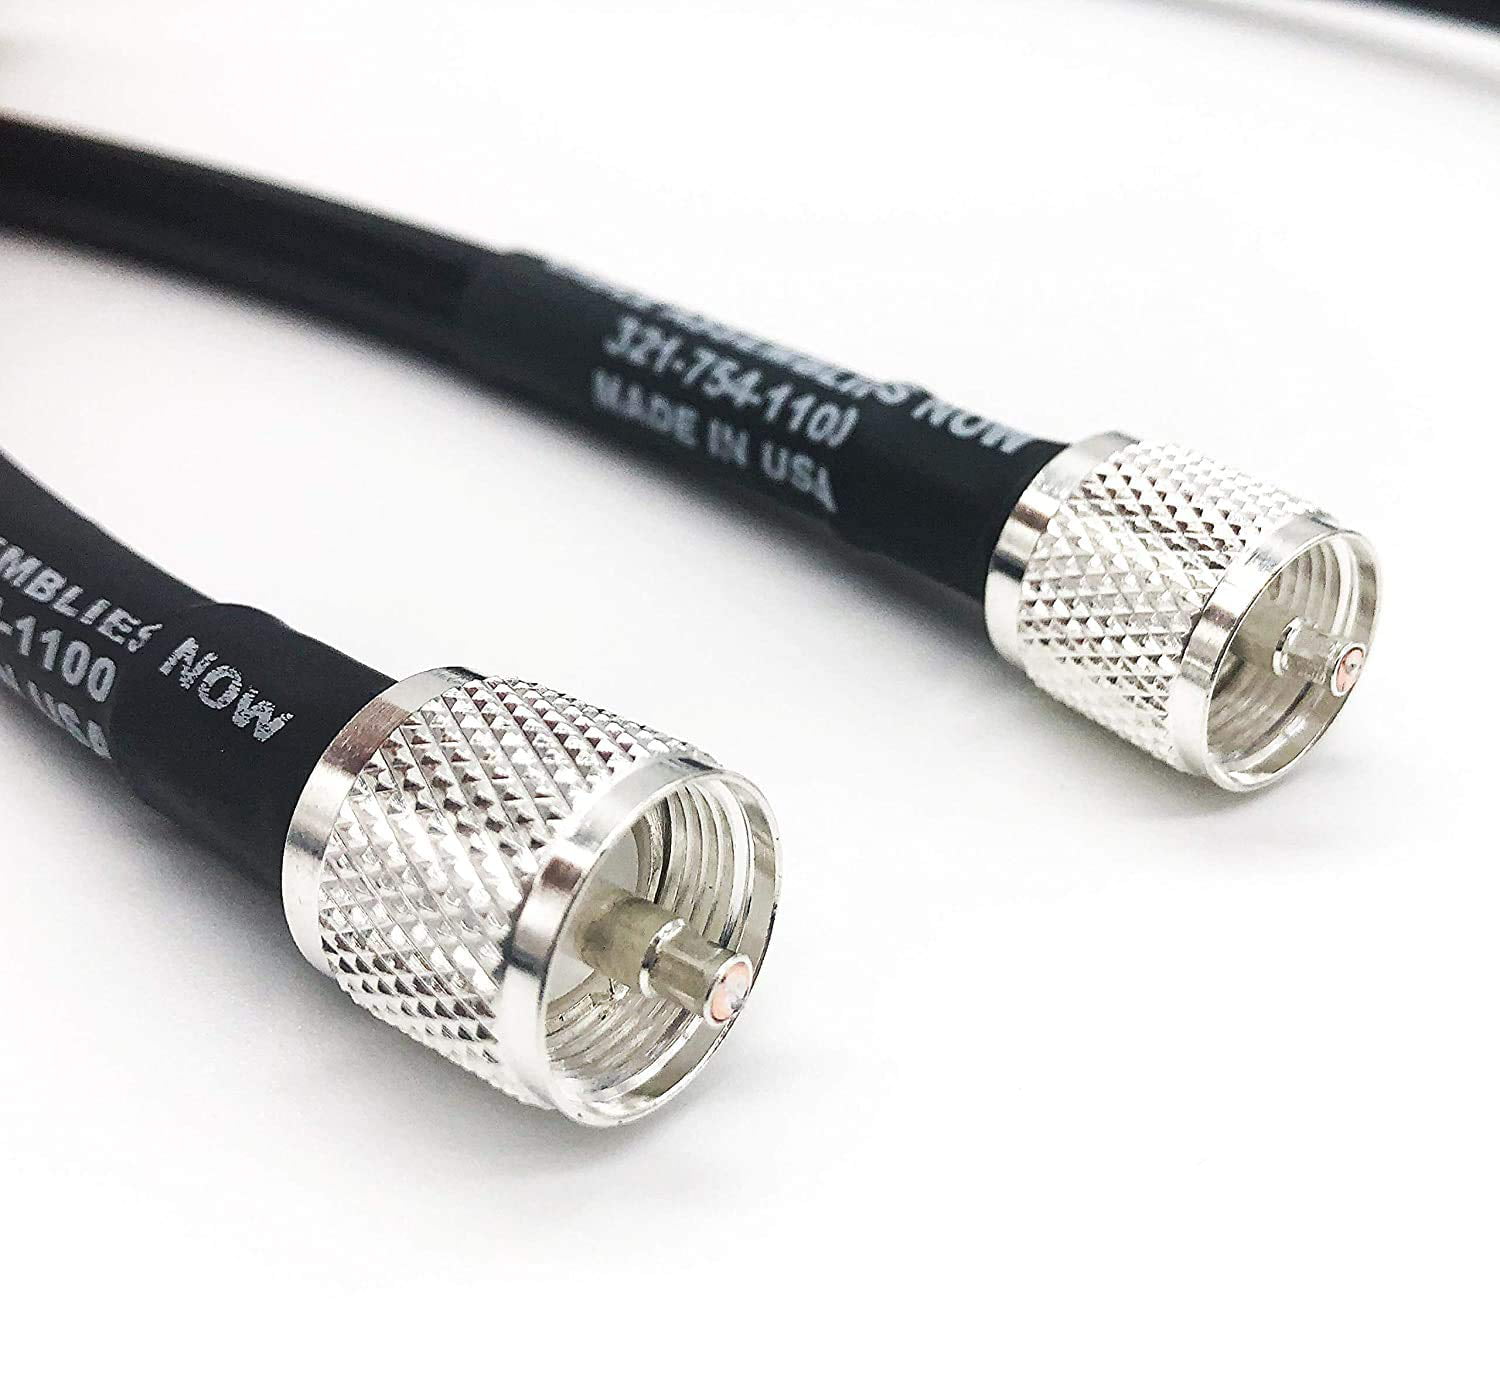 Times Microwave LMR-400 Coaxial Antenna Cable N male PL-259 UHF Connectors 60 ft 